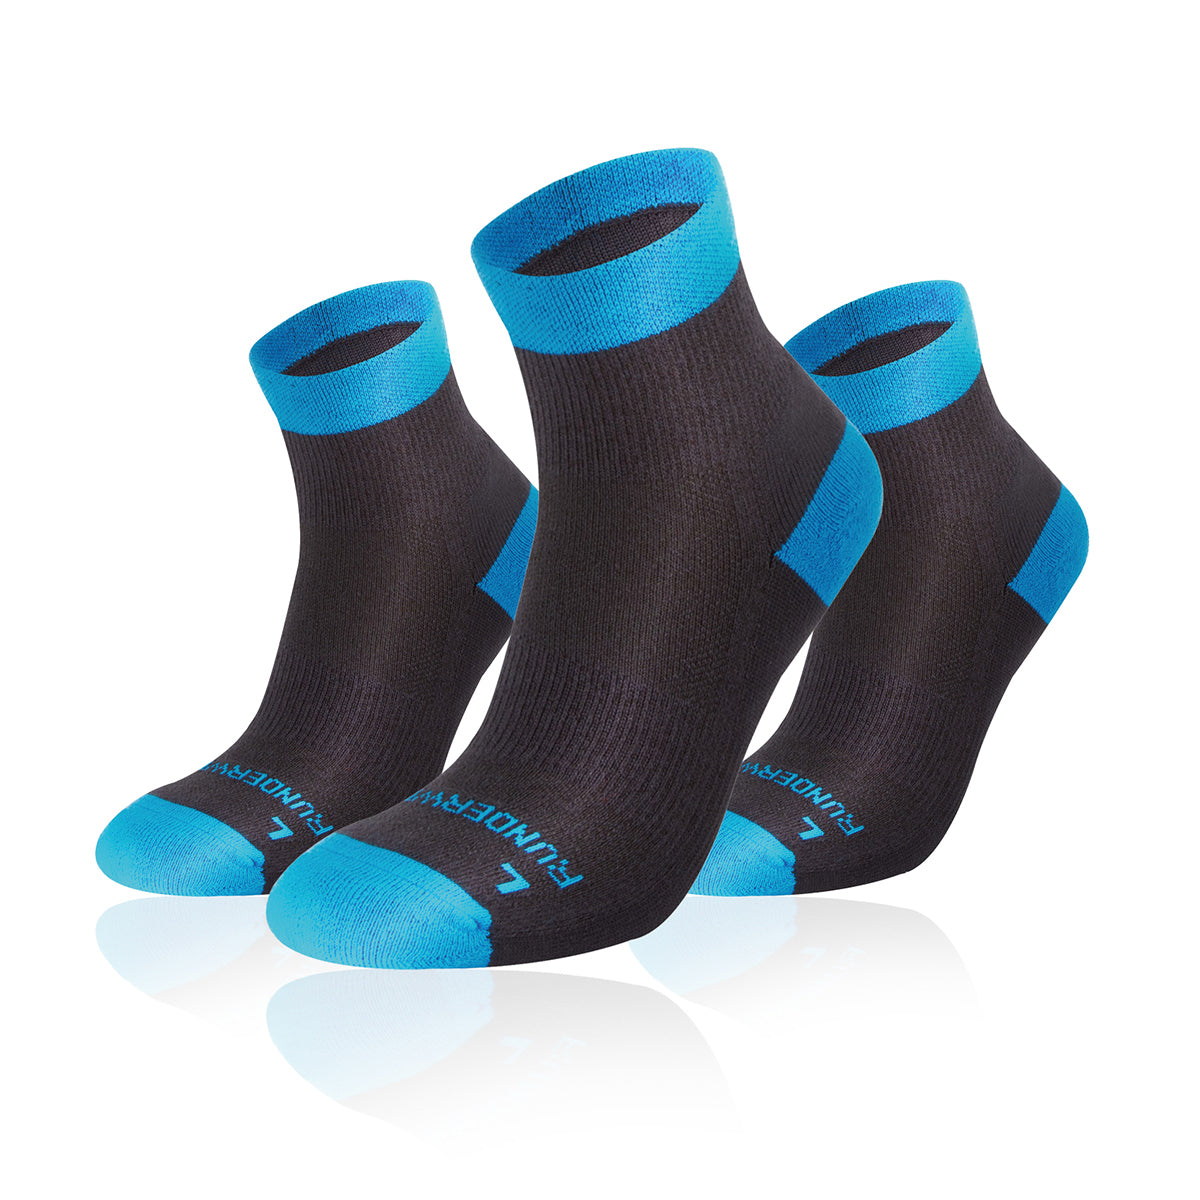 Stop the Blisters with Runderwear - Ultra Runner Mag